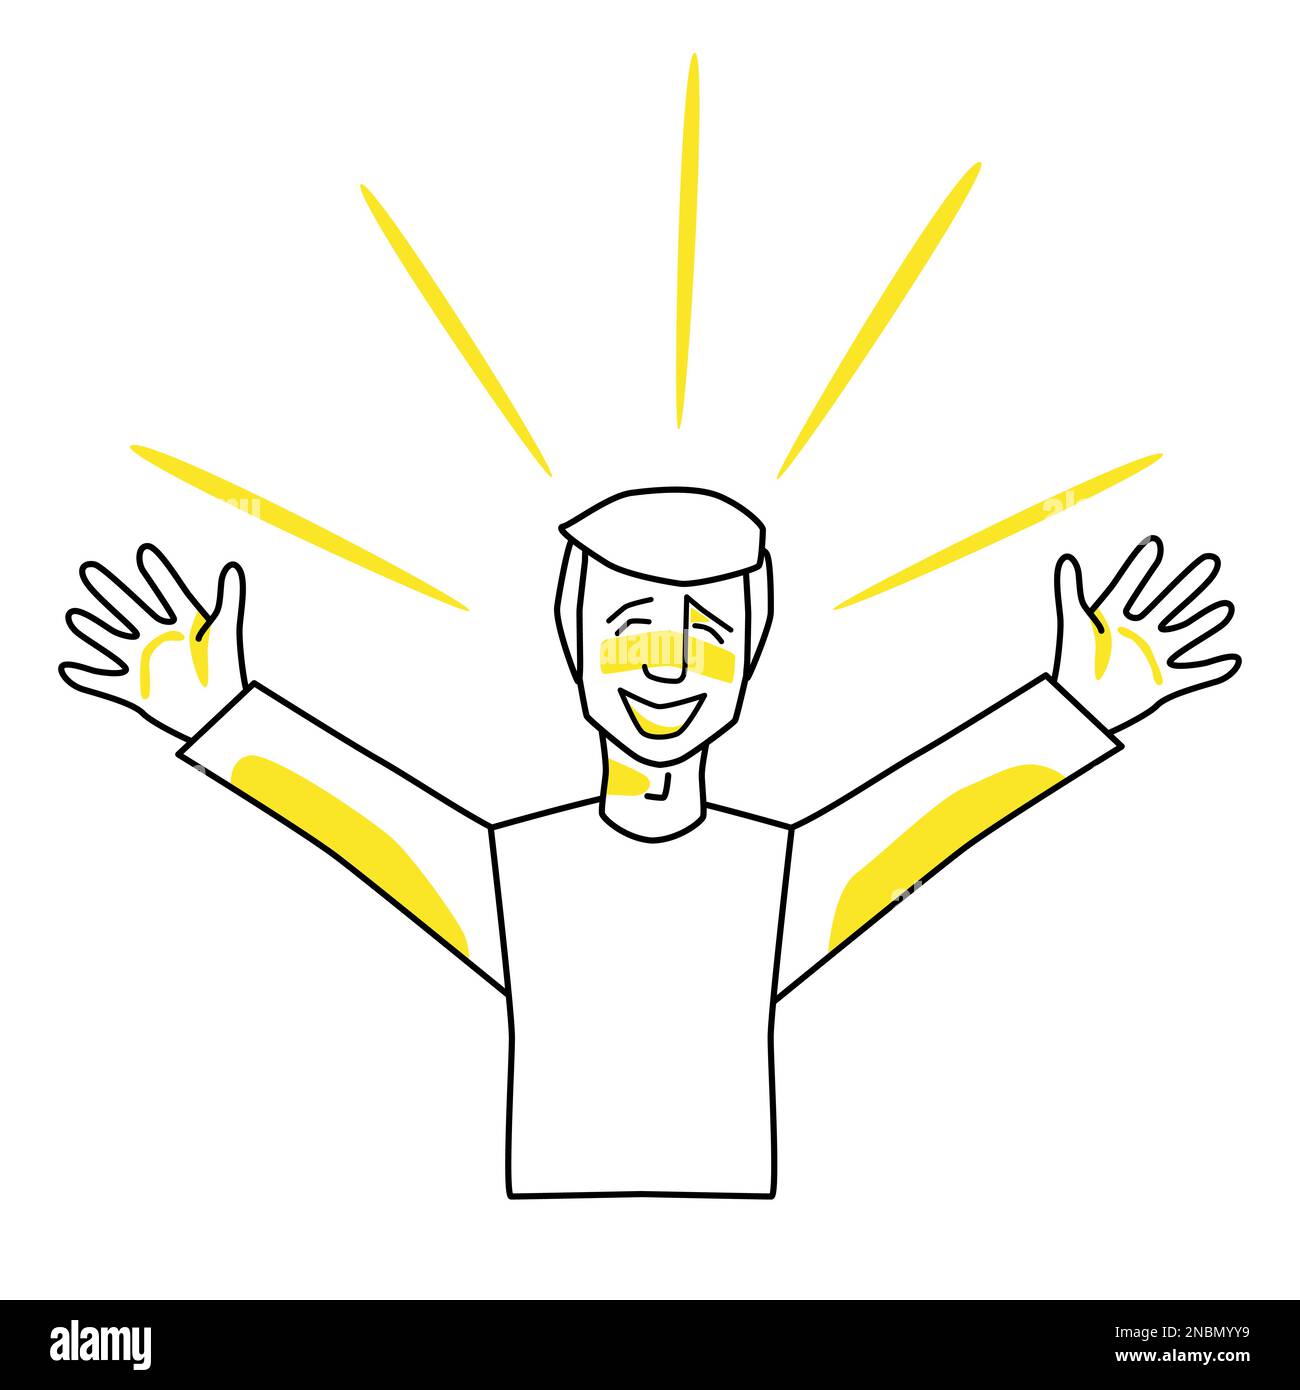 Happy man, emotion of happiness. Joyful male character, line art, hand drawn sketch style vector with yellow spots. Stock Vector